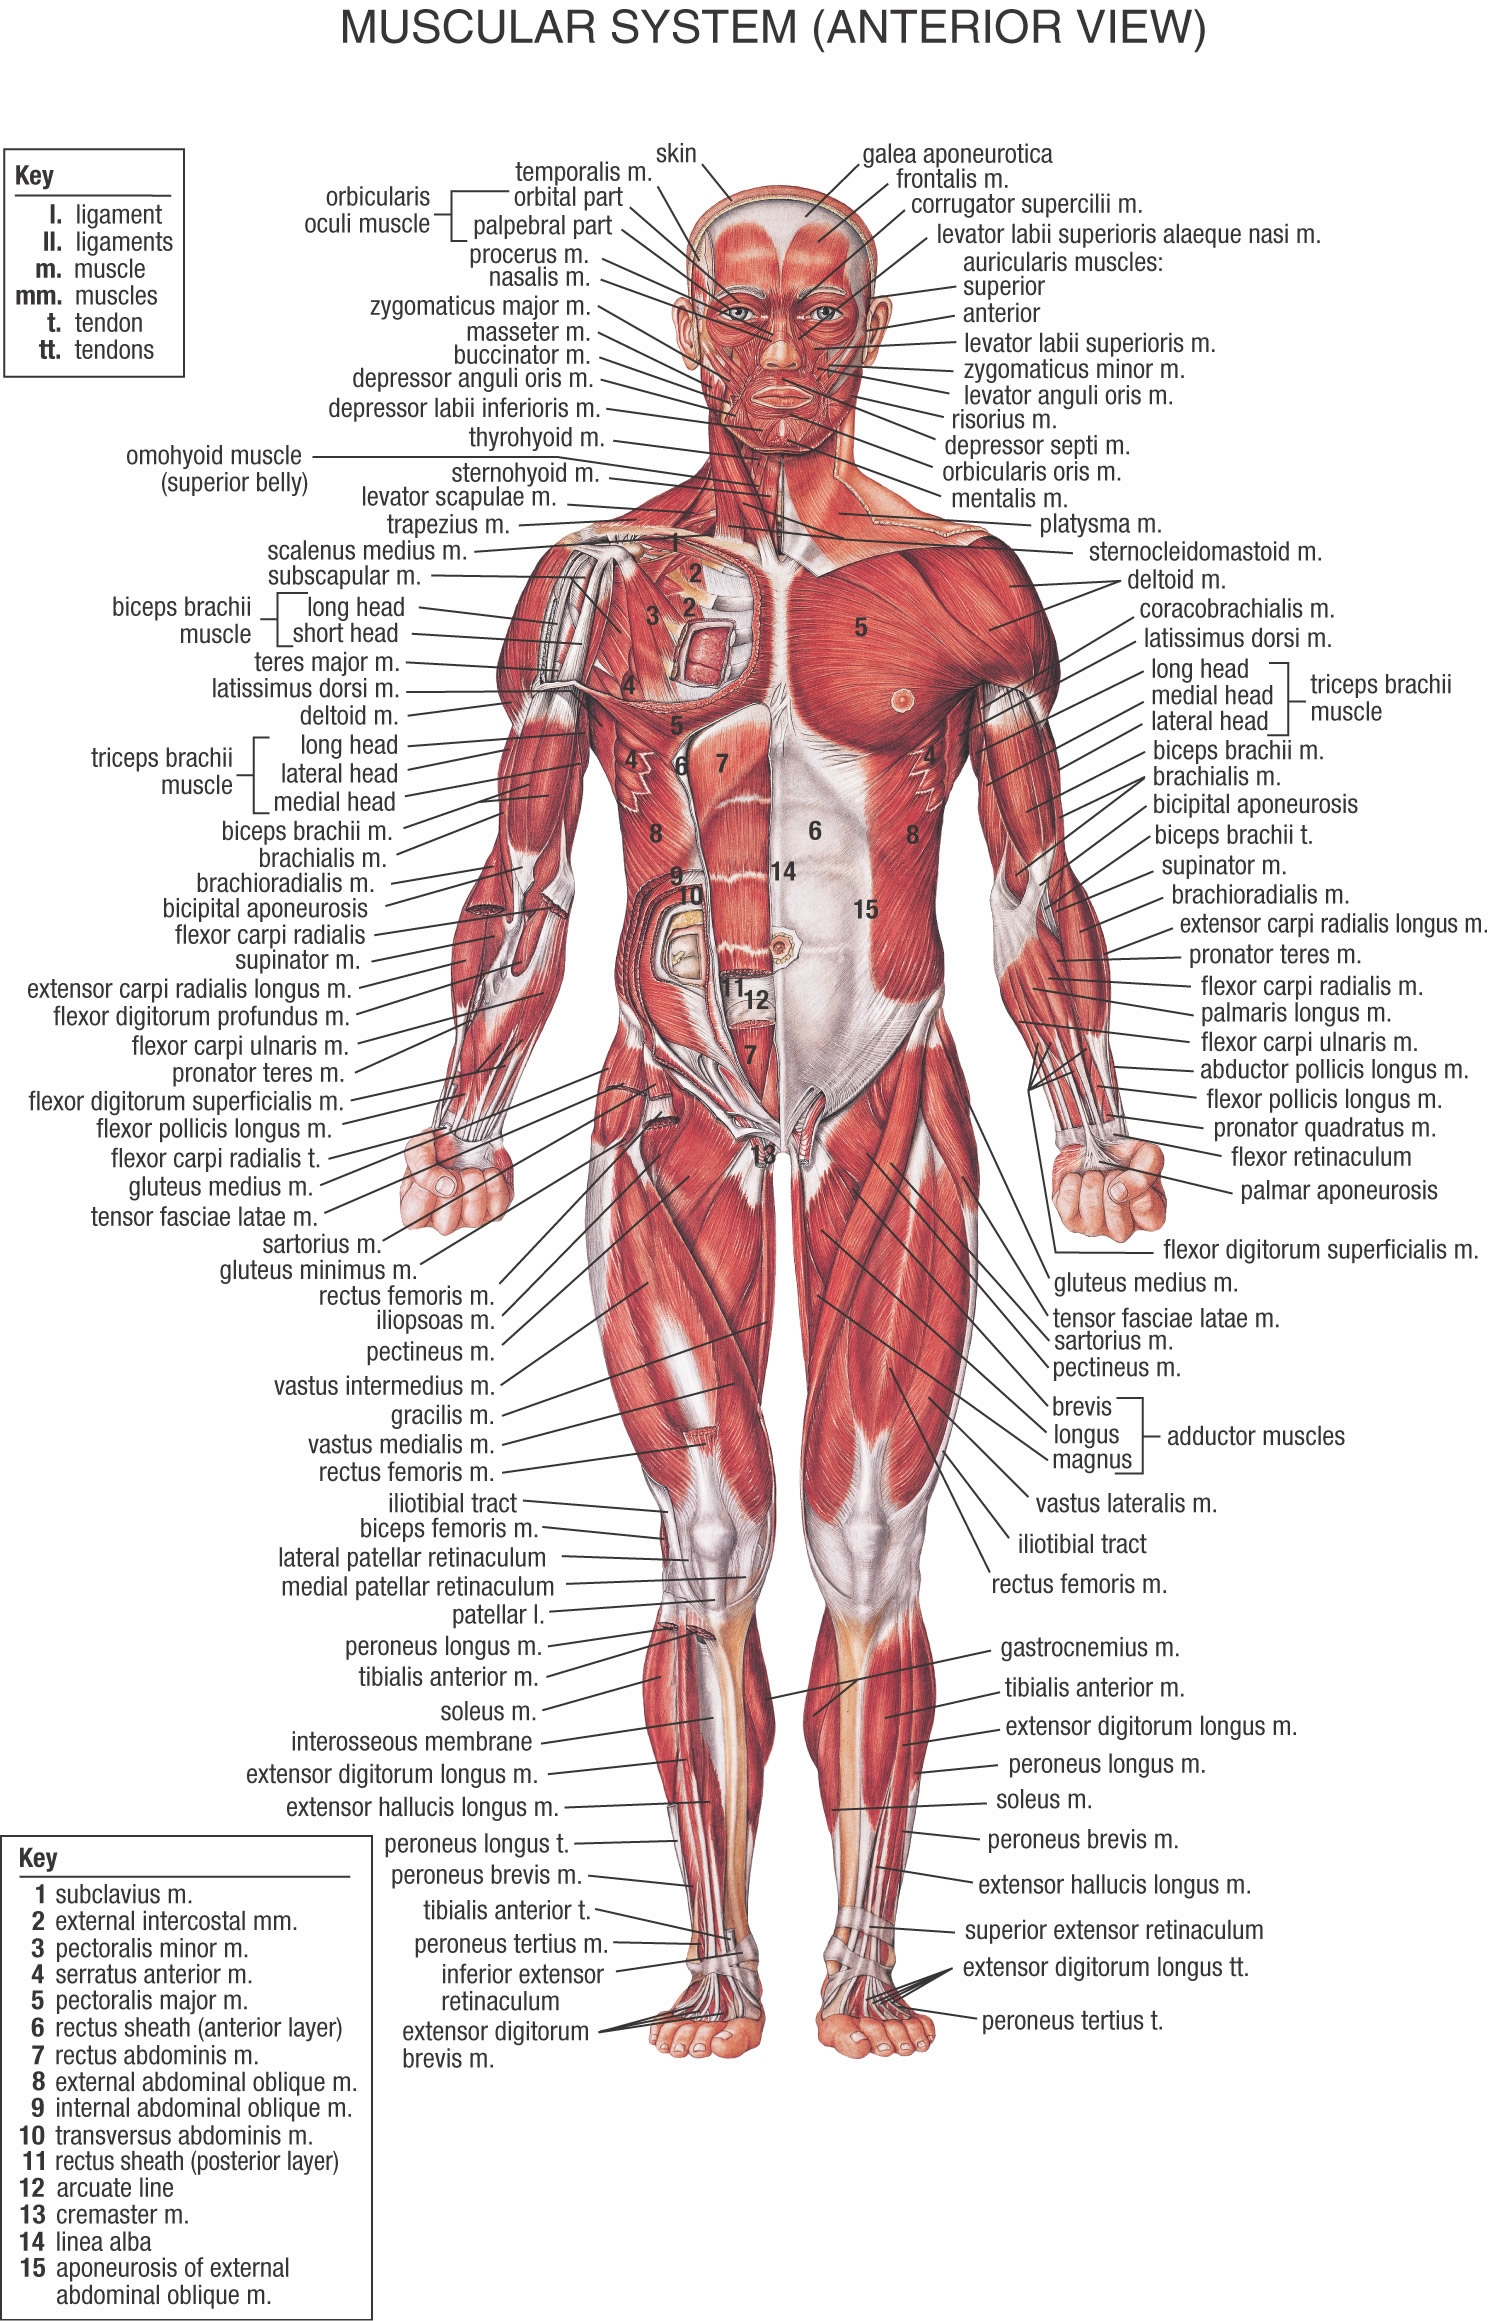 Muscular_System_Front.jpg